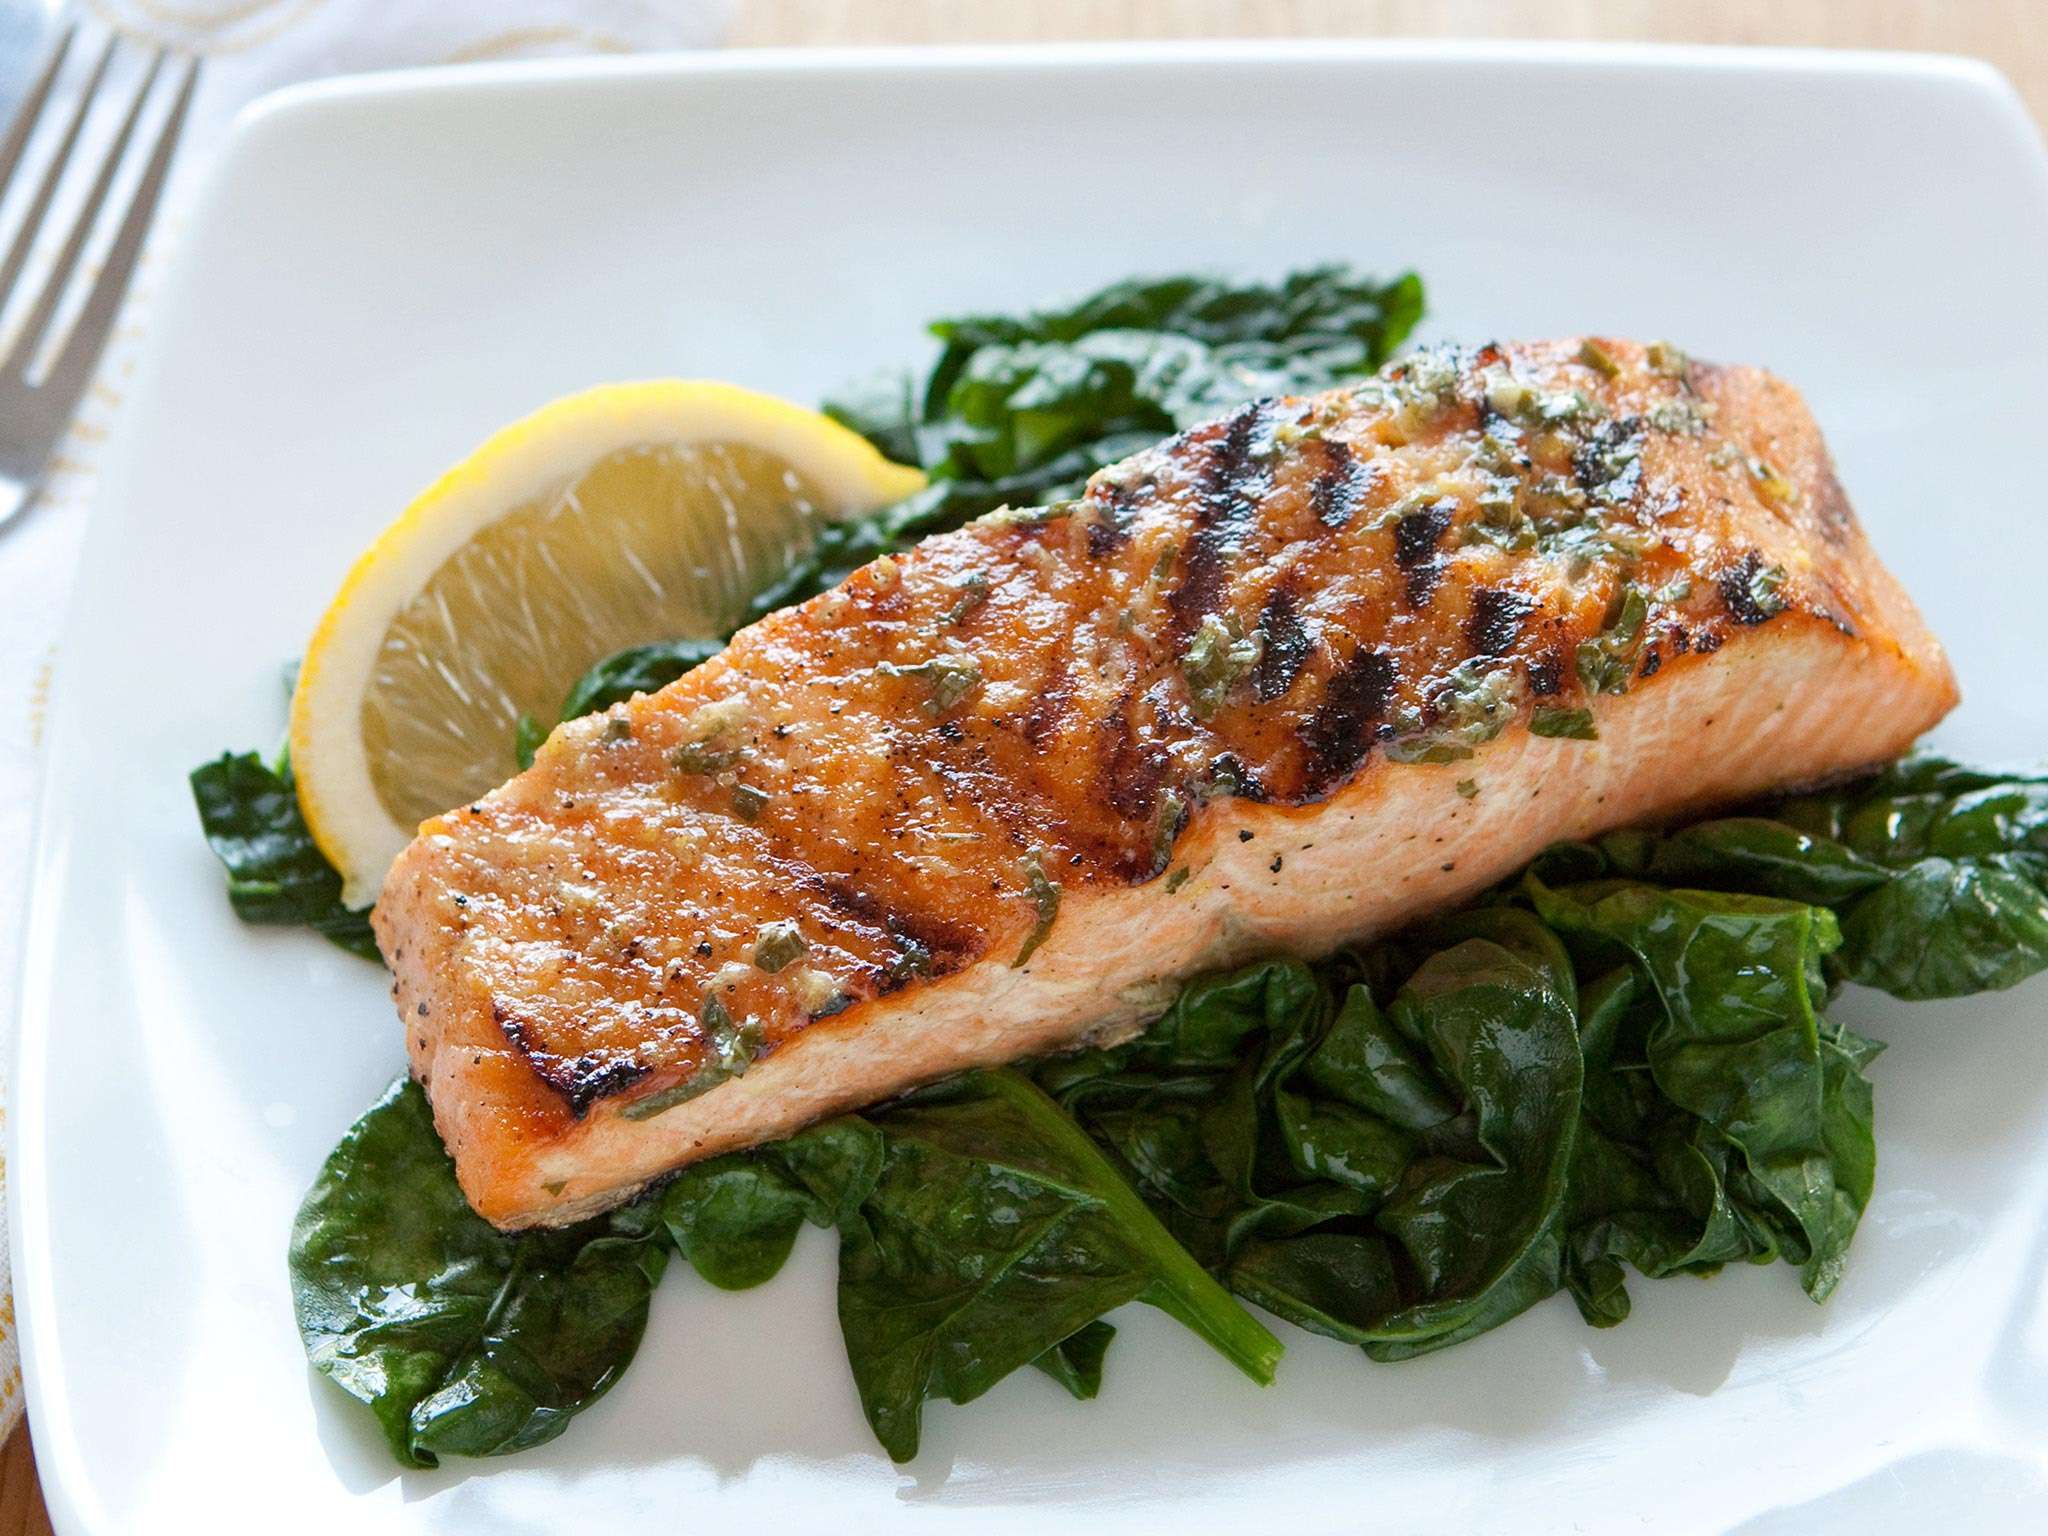 Recipe: Grilled Salmon with Basil Lemon Butter